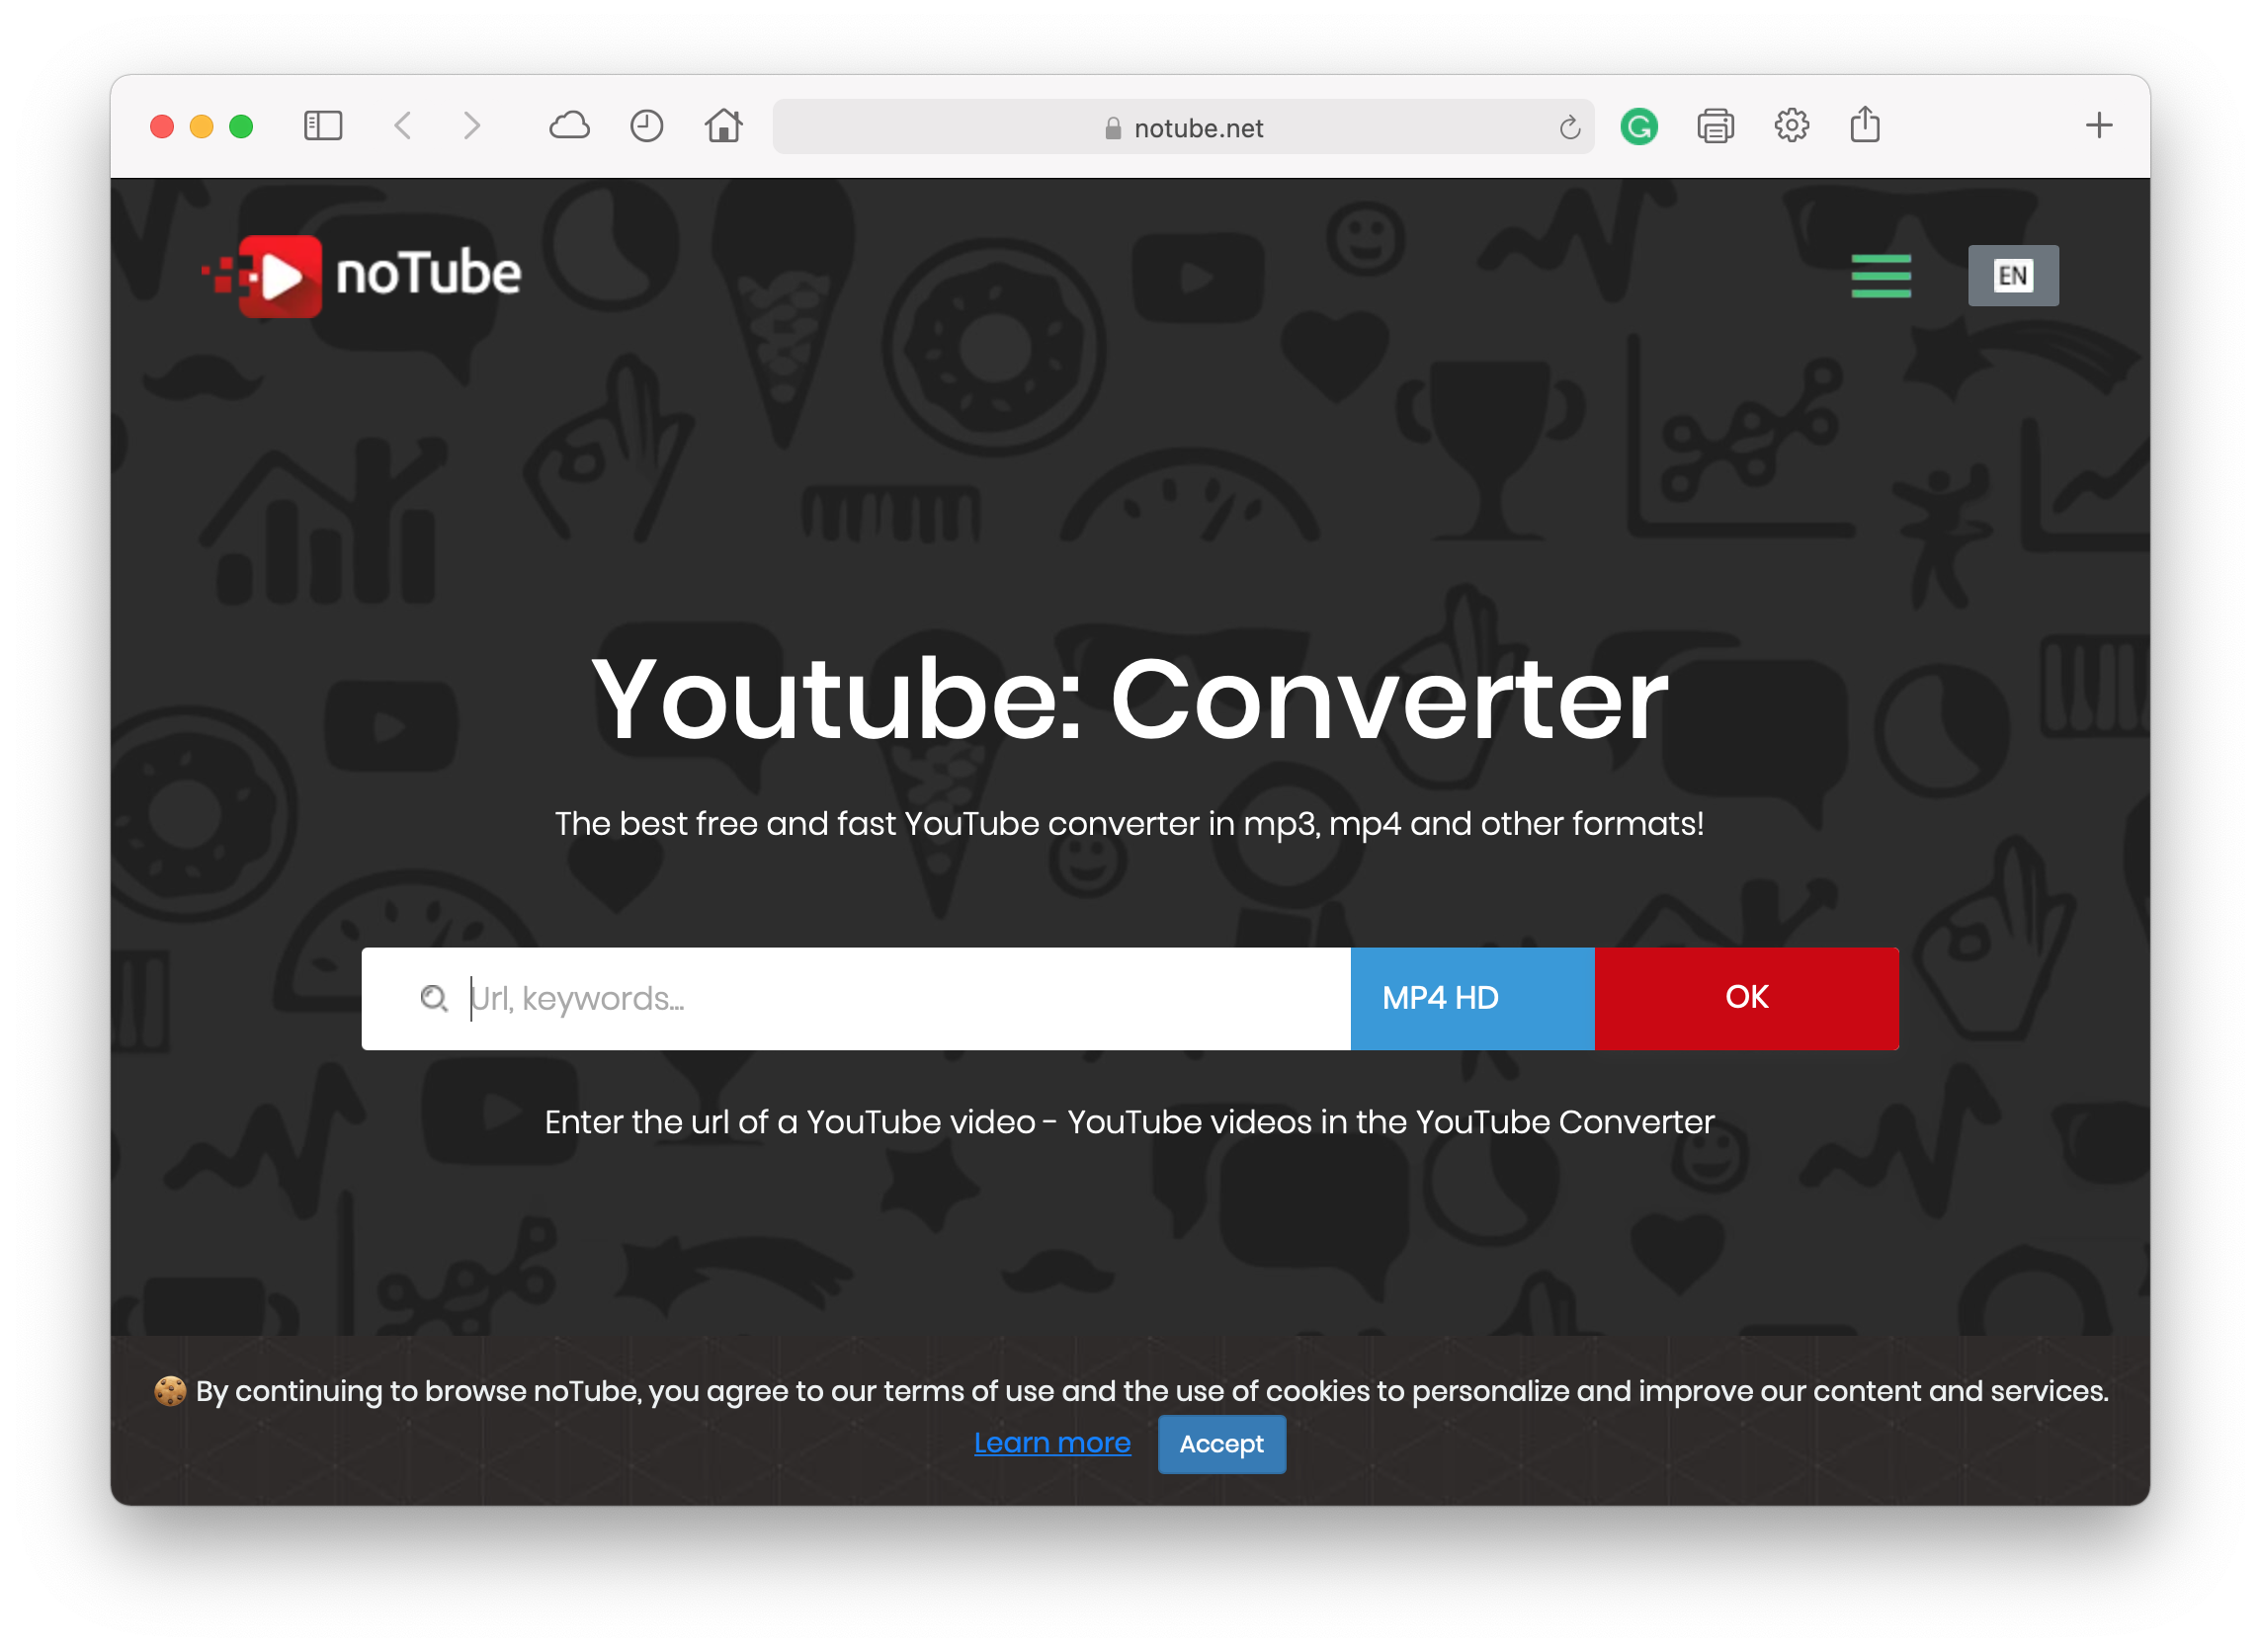 How to download youtube videos